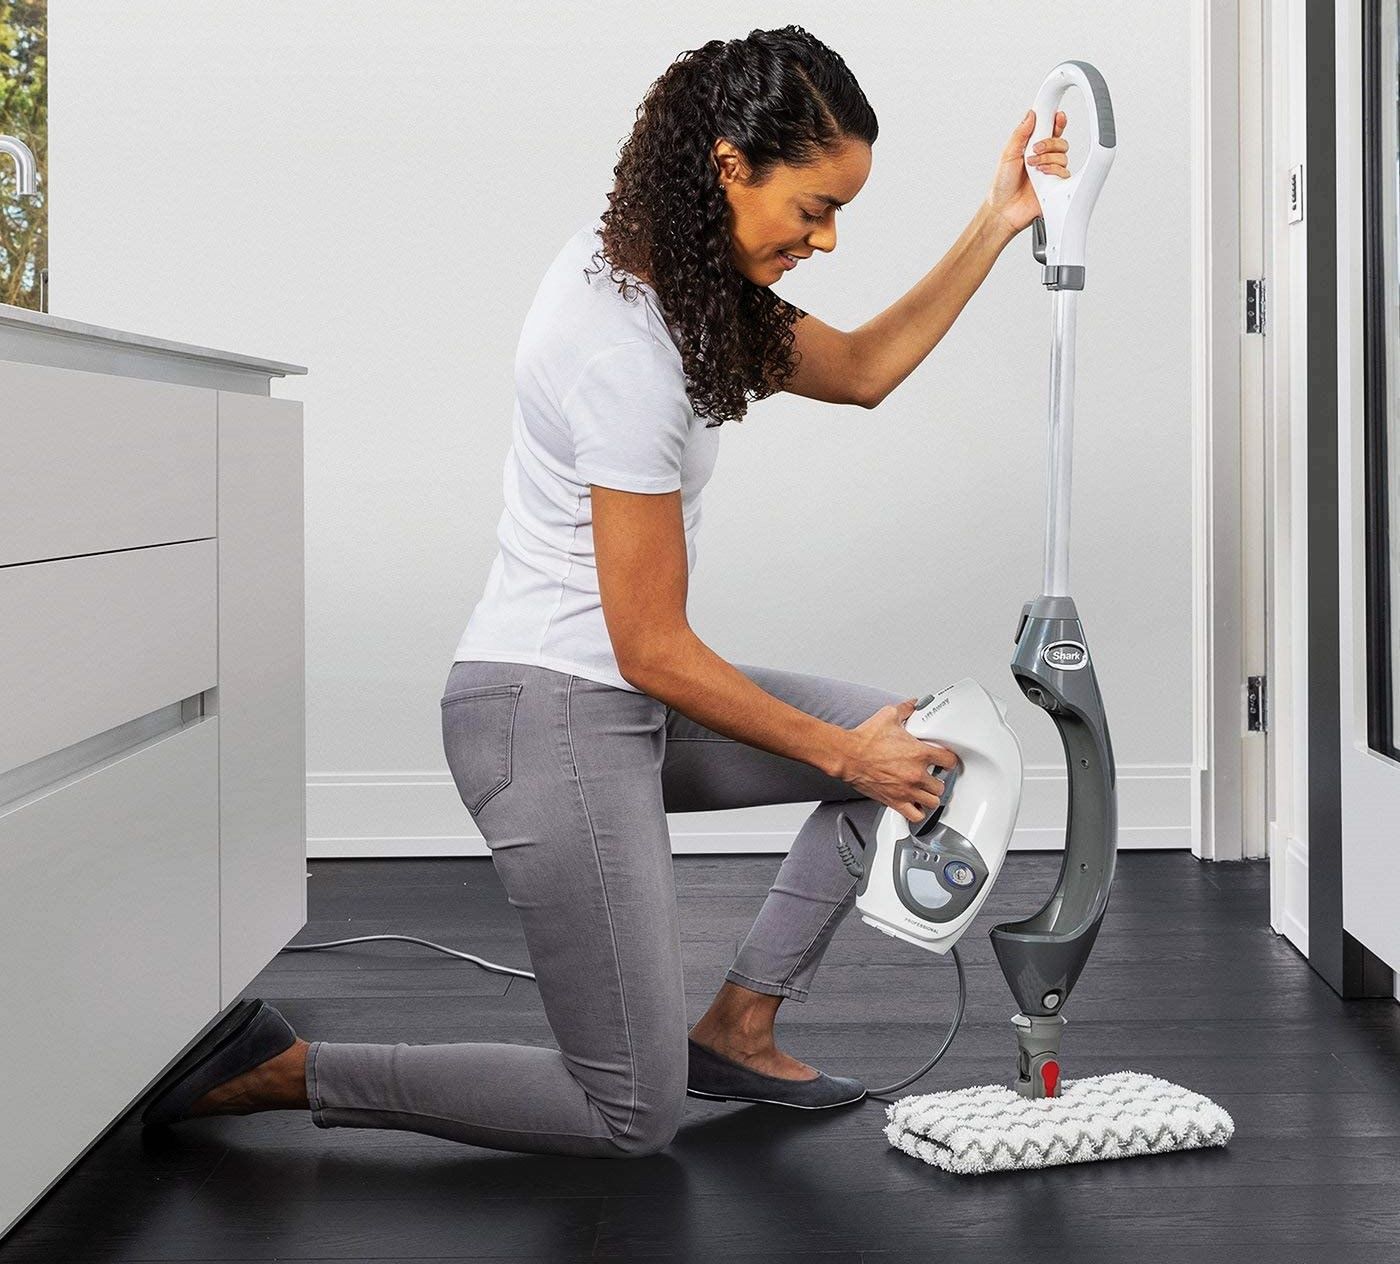 Shark steam mop review: Will the new steam cleaner transform your floors?